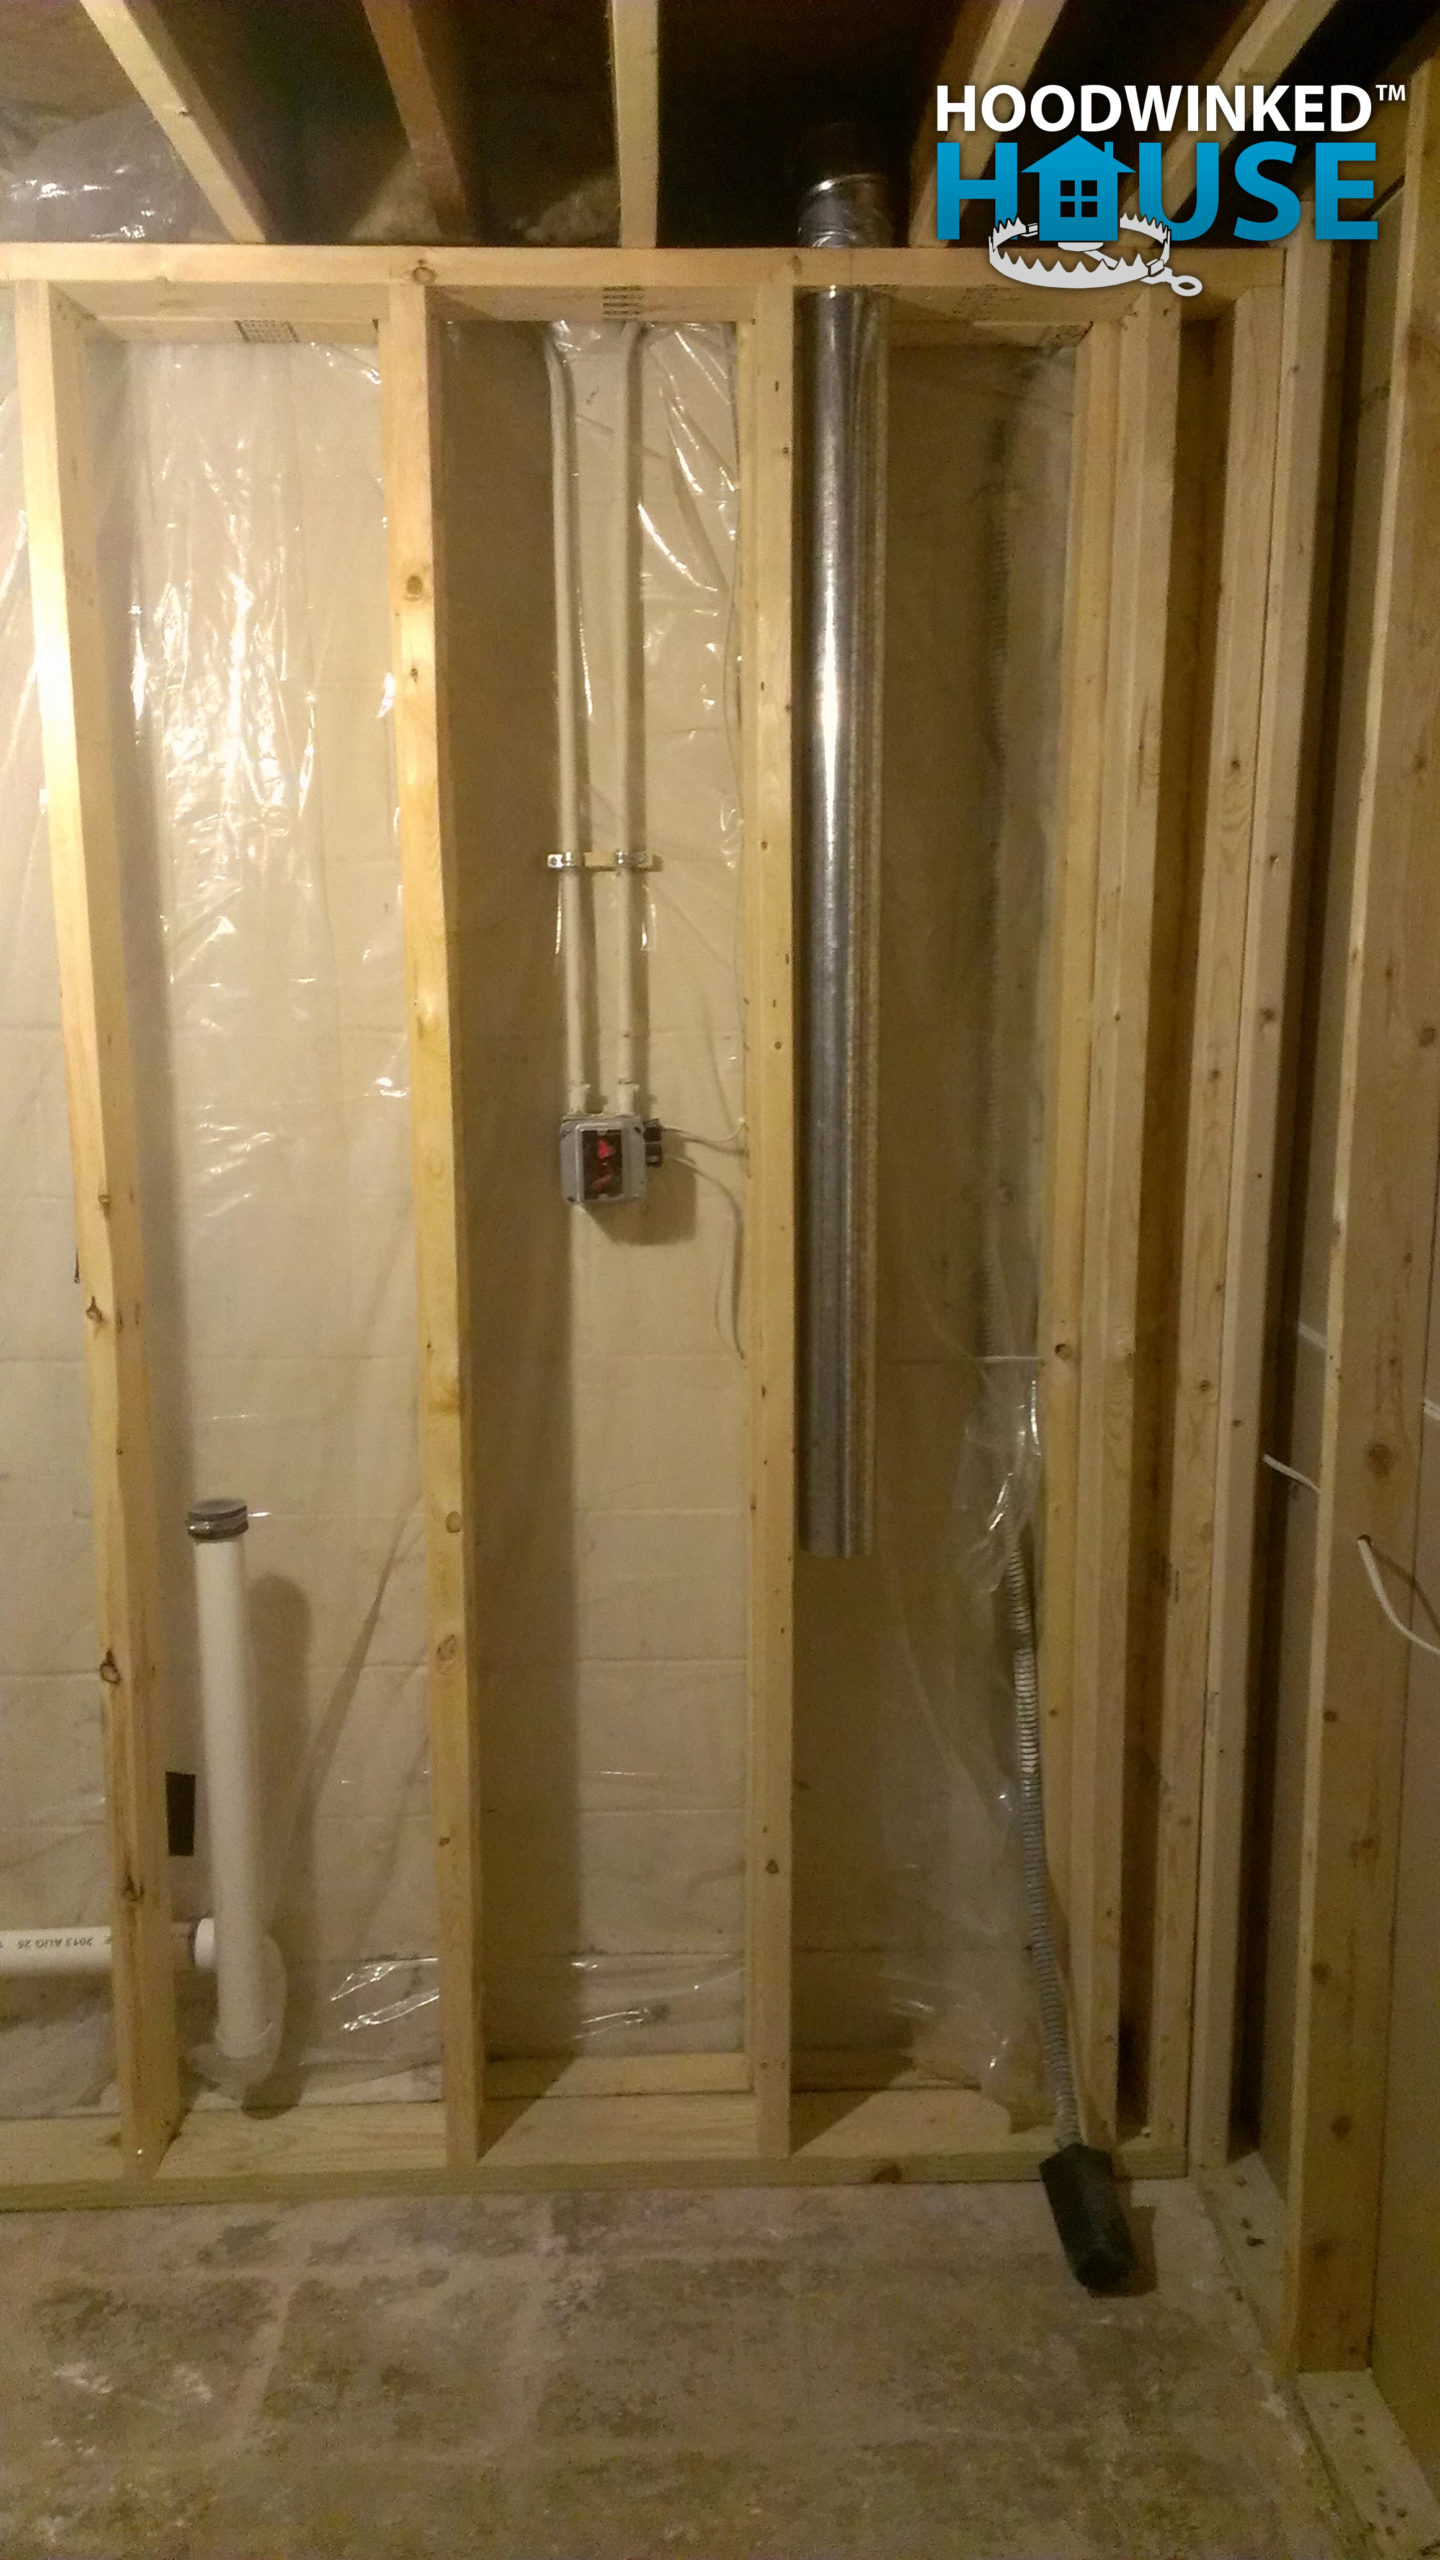 Framing in a basement over drain pies and a dryer vent.